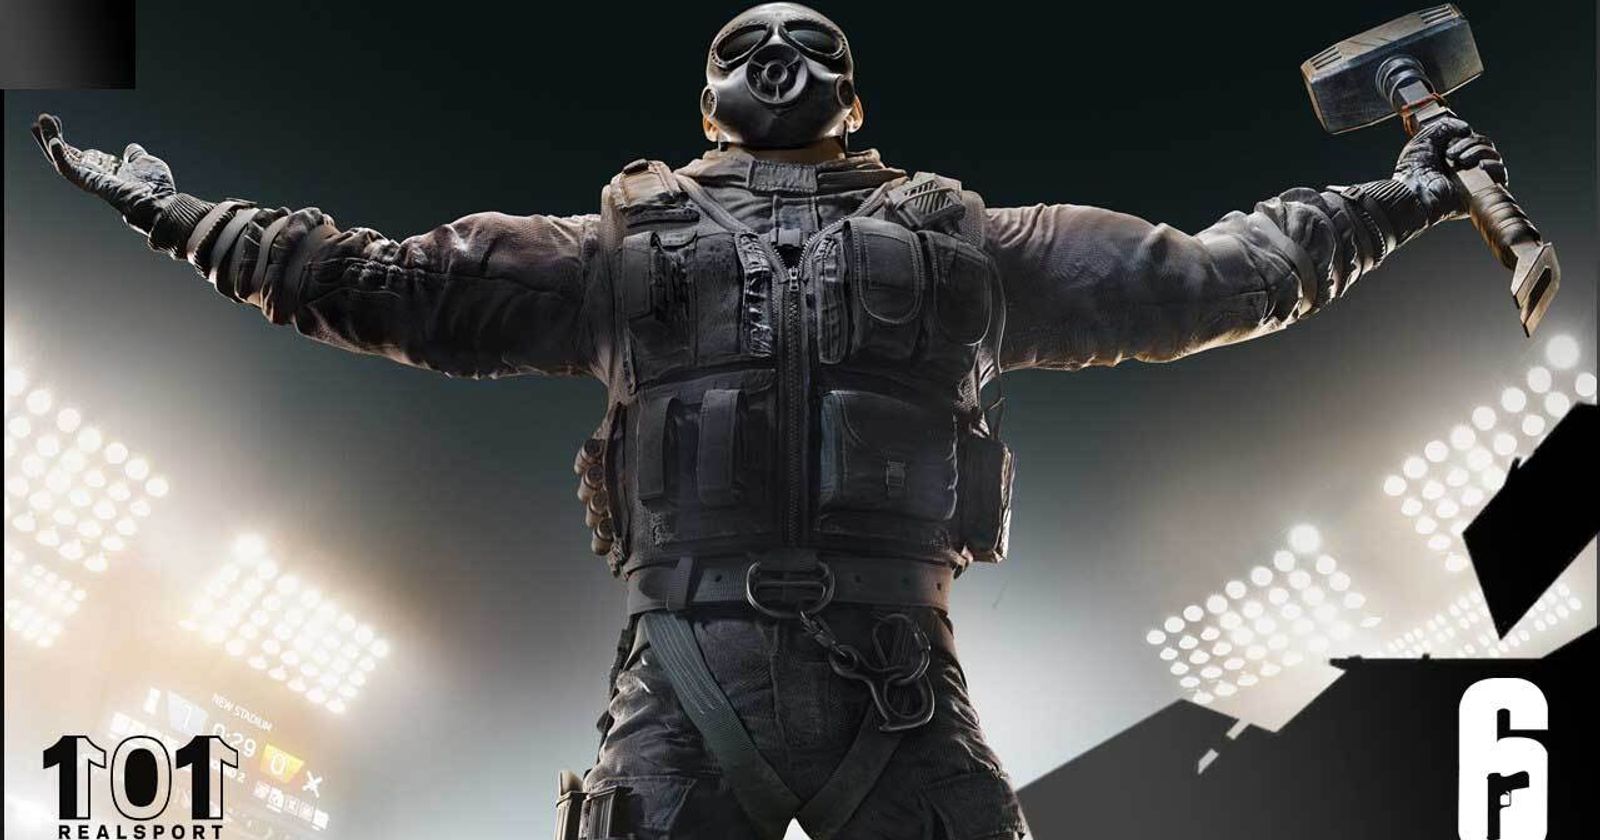 Rainbow Six Siege May Include Crossplay in the Future